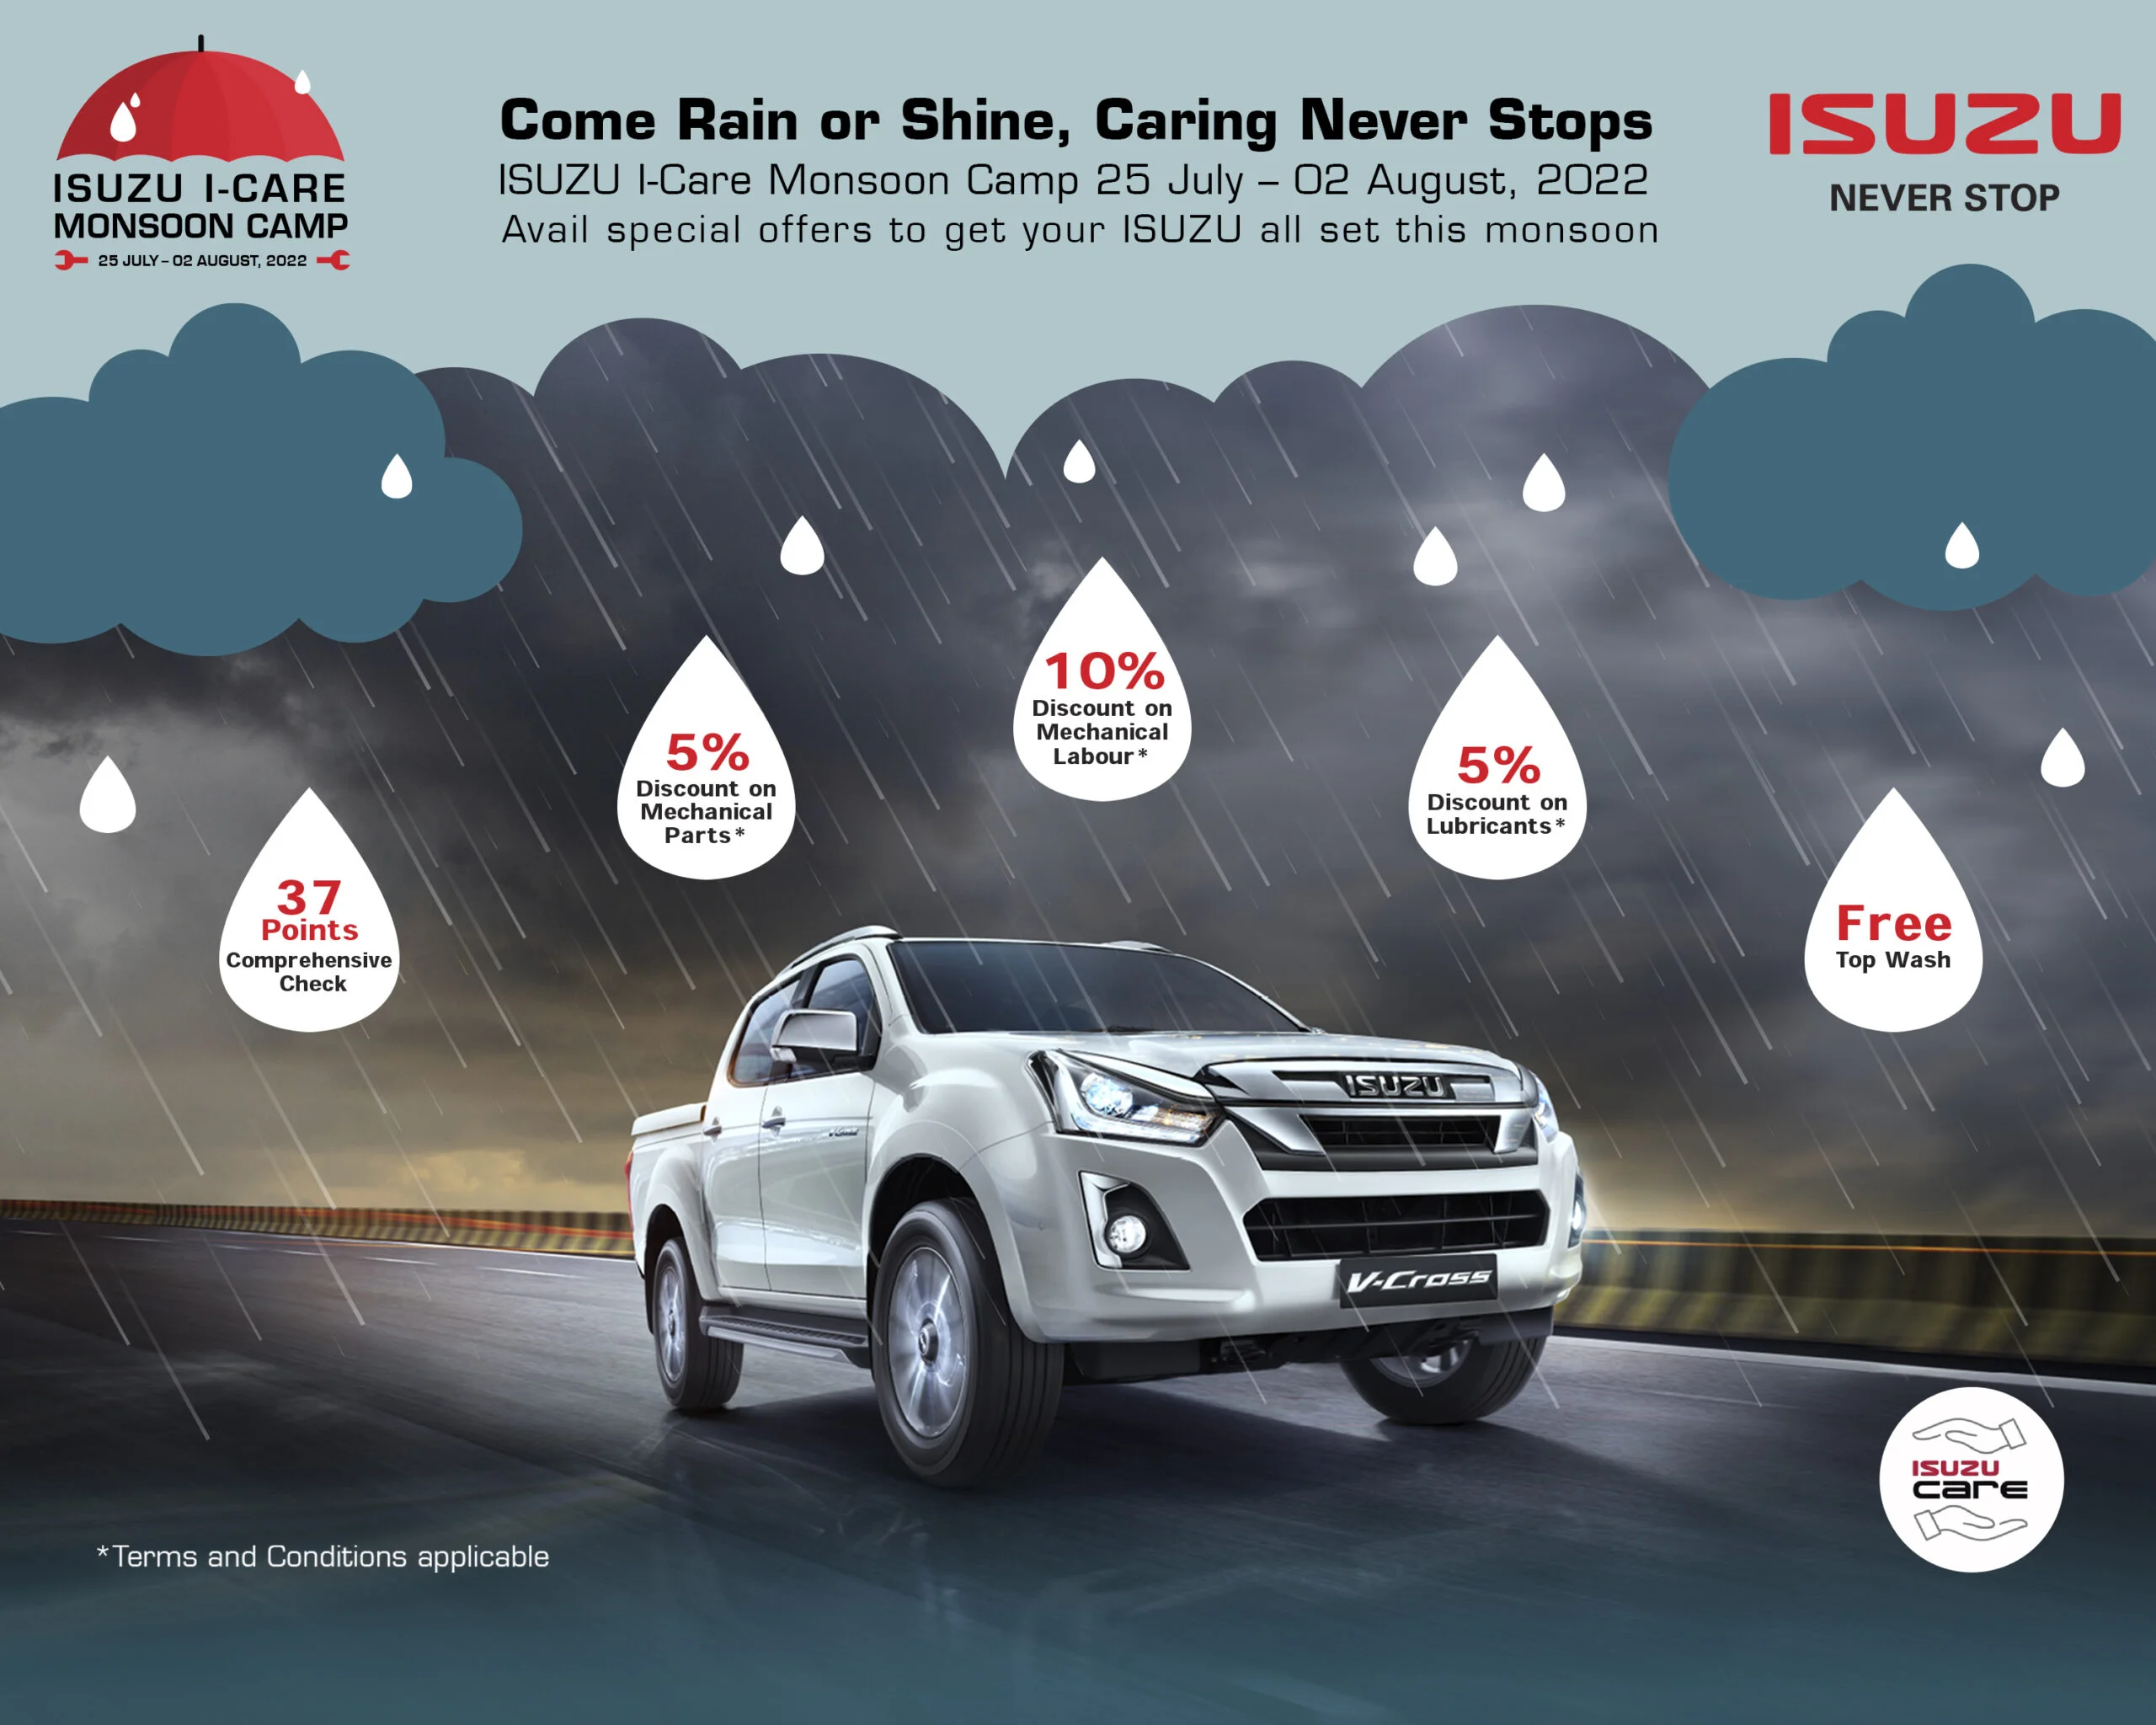 2022 Isuzu Monsoon Camp Begins In All Its Facilities With Discounts